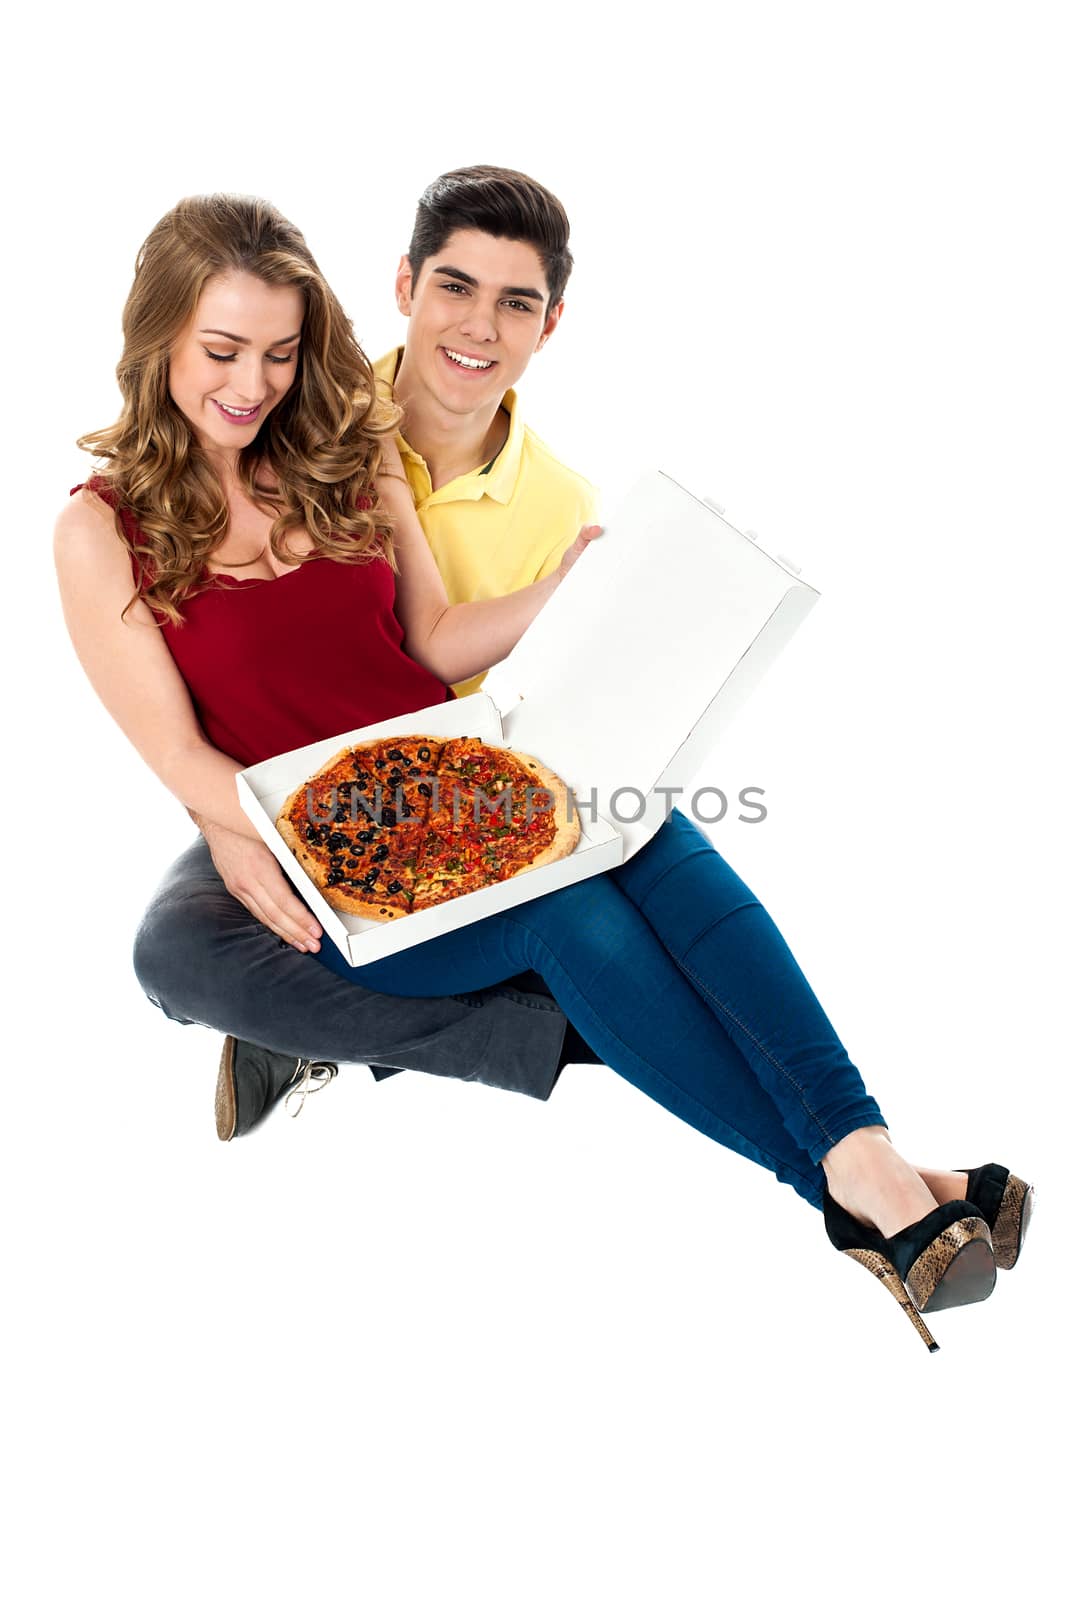 Young boy surprises girlfriend with pizza by stockyimages